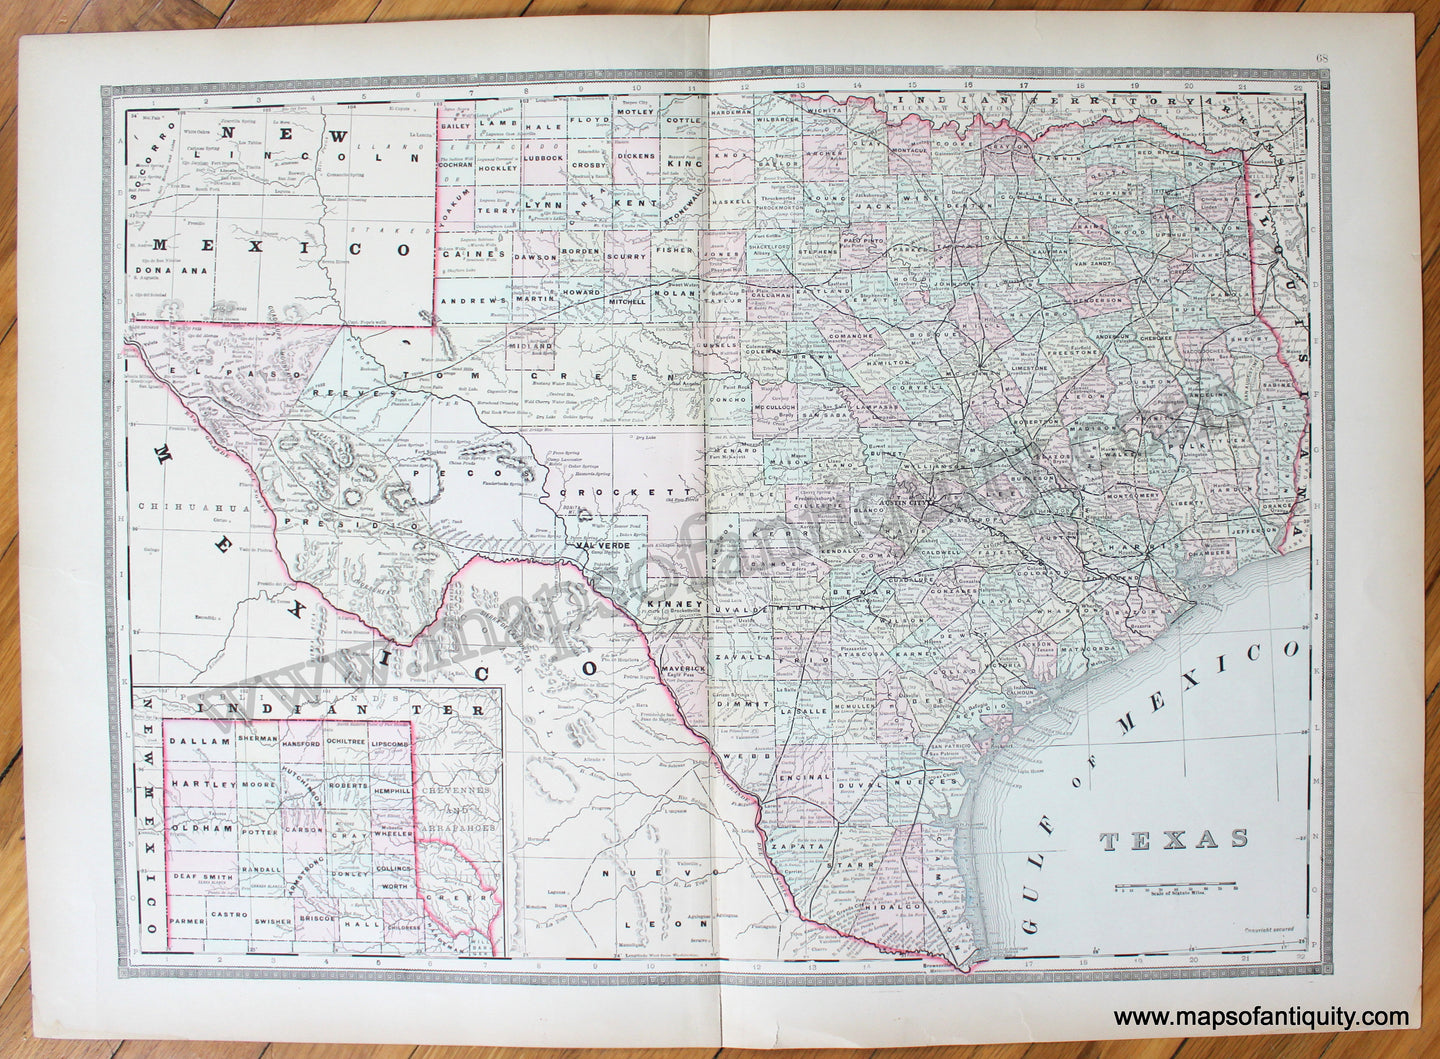 Antique-Hand-Colored-Map-Texas--United-States-South-1887-Bradley-Maps-Of-Antiquity